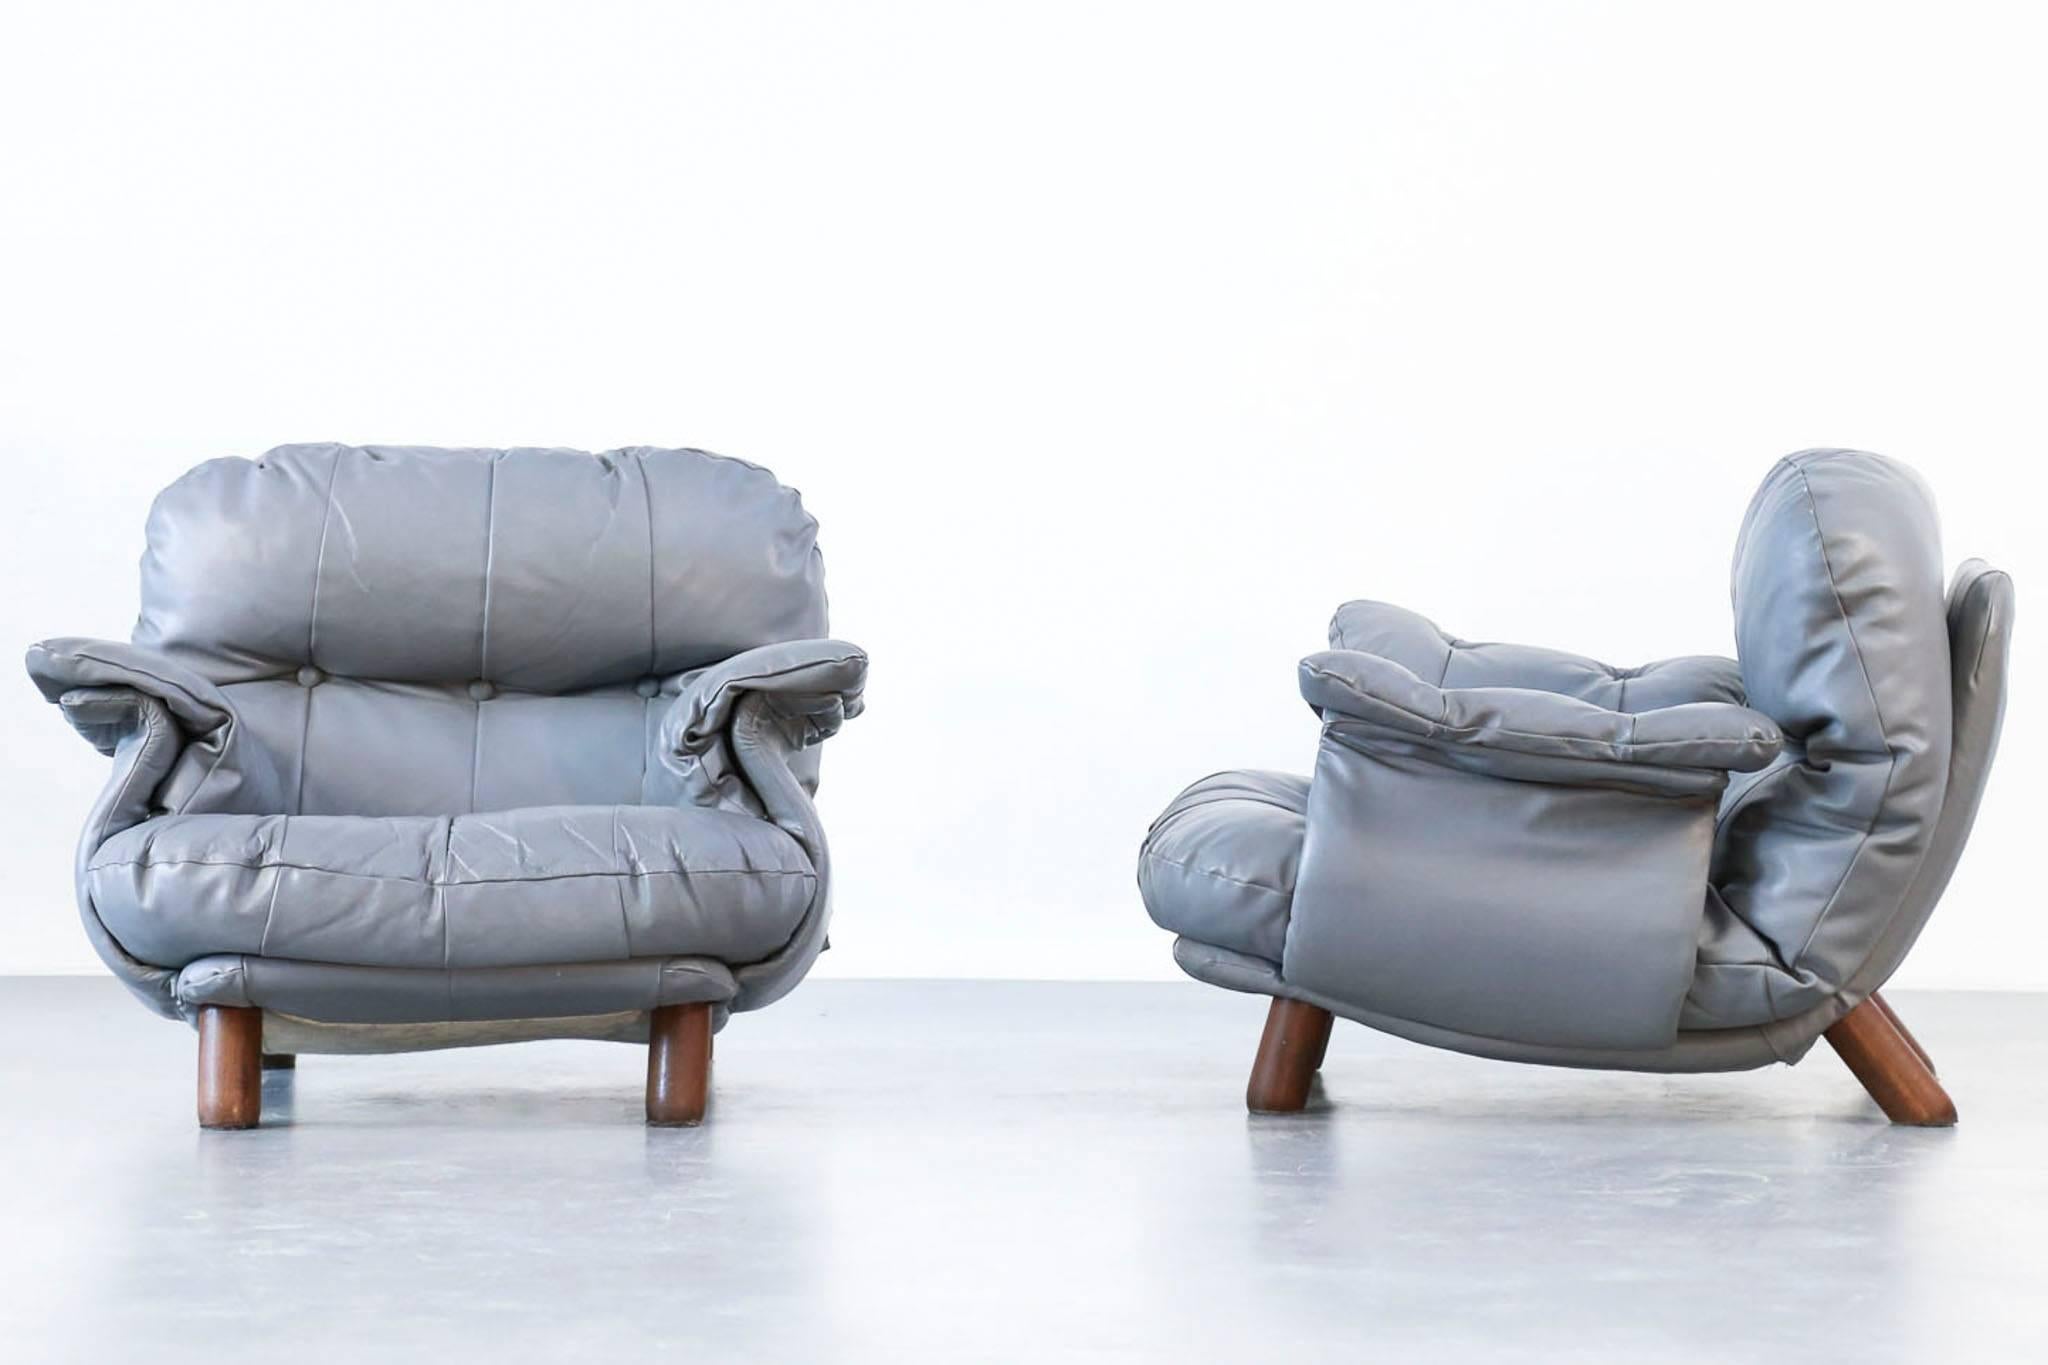 Steel Pair of Lounge Chairs by E. Cobianchi, Italian Design 